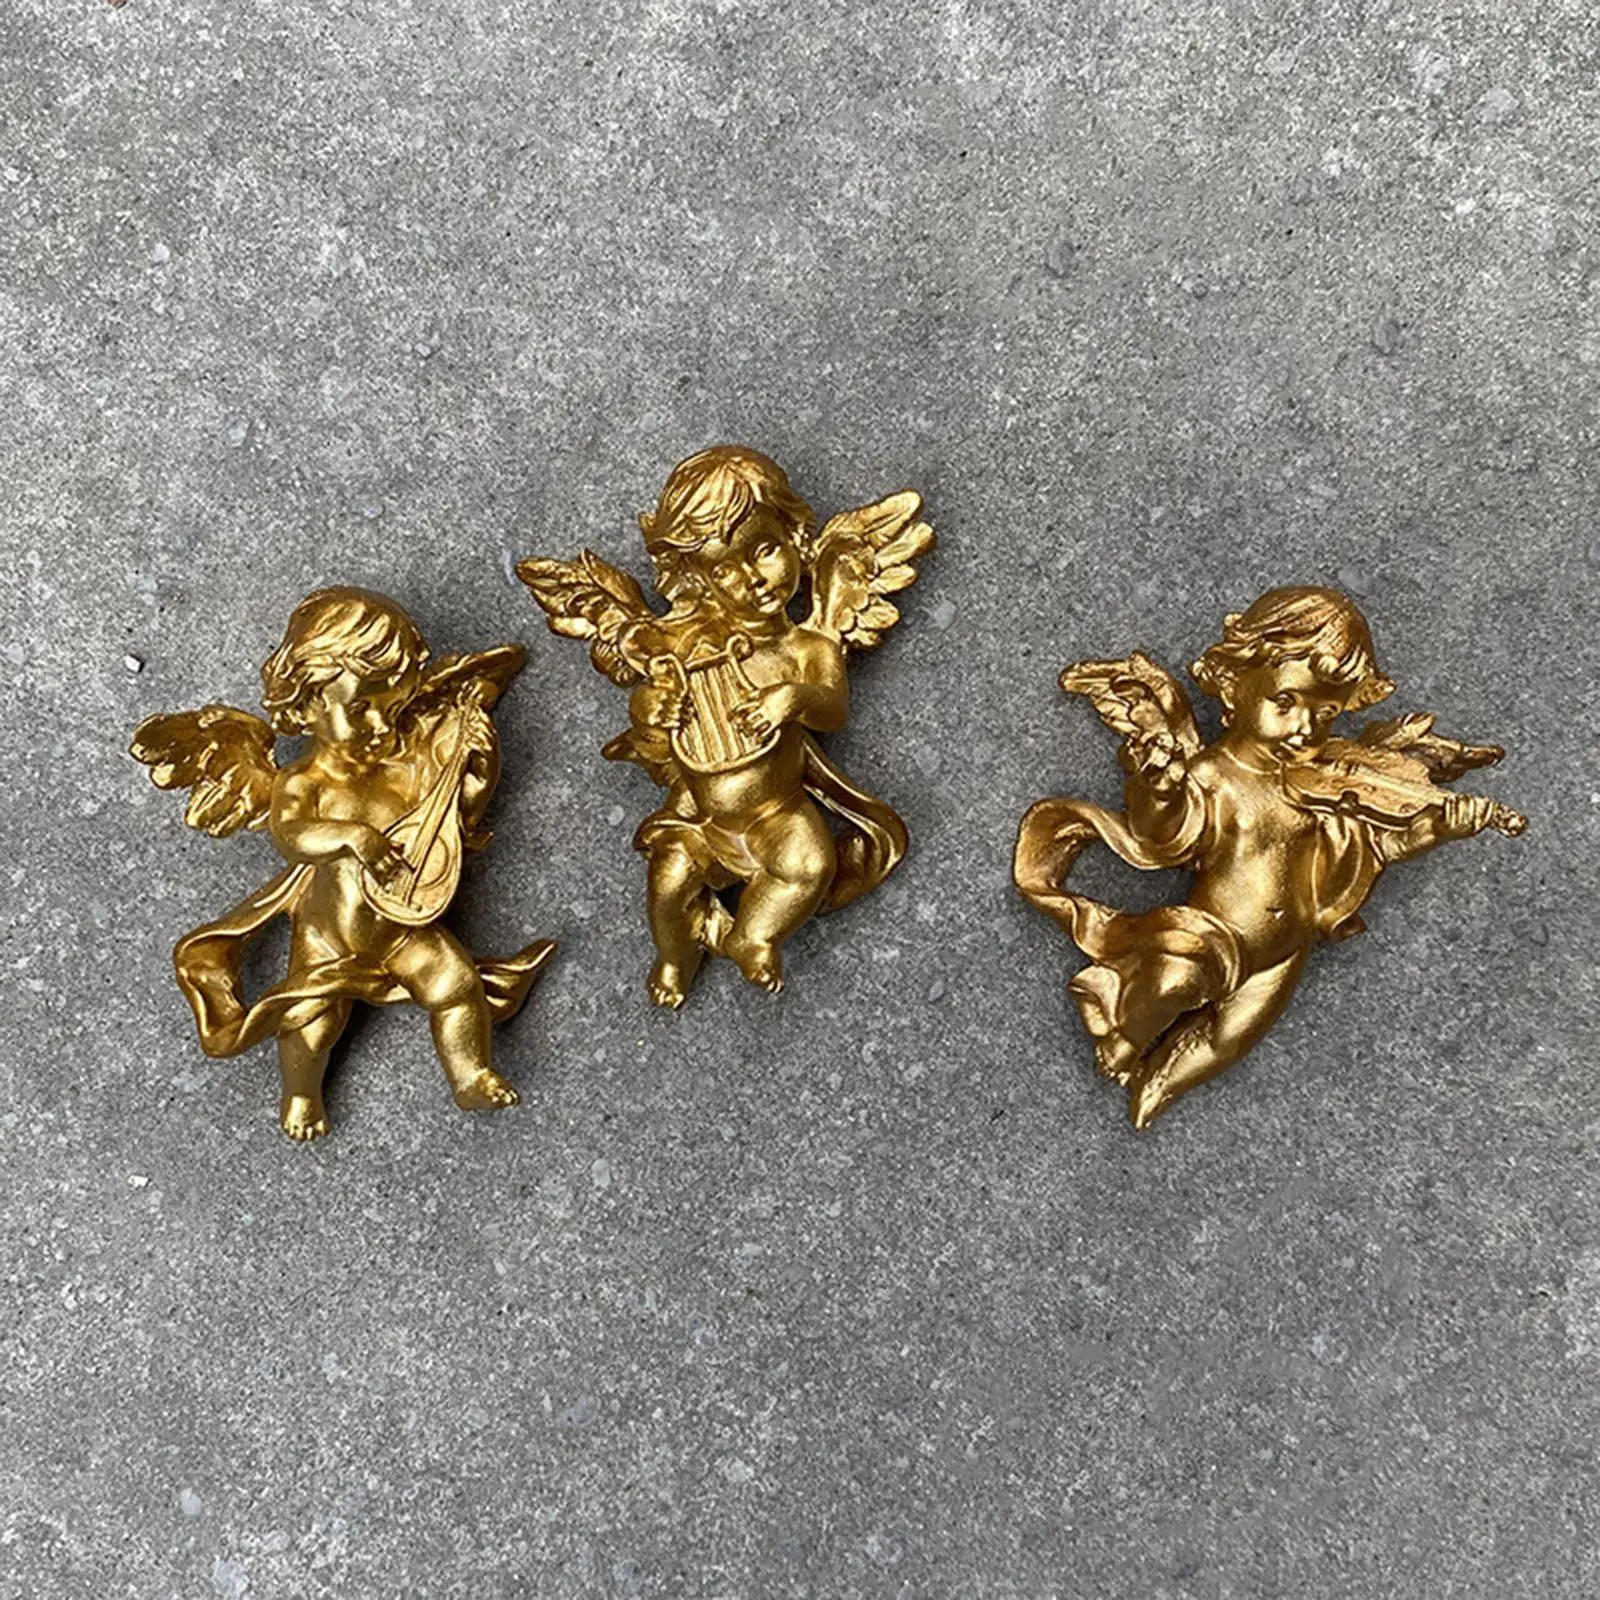 Angel Statue Figurines Cherub Wall Sculpture Wings Decorative for Home Hotel